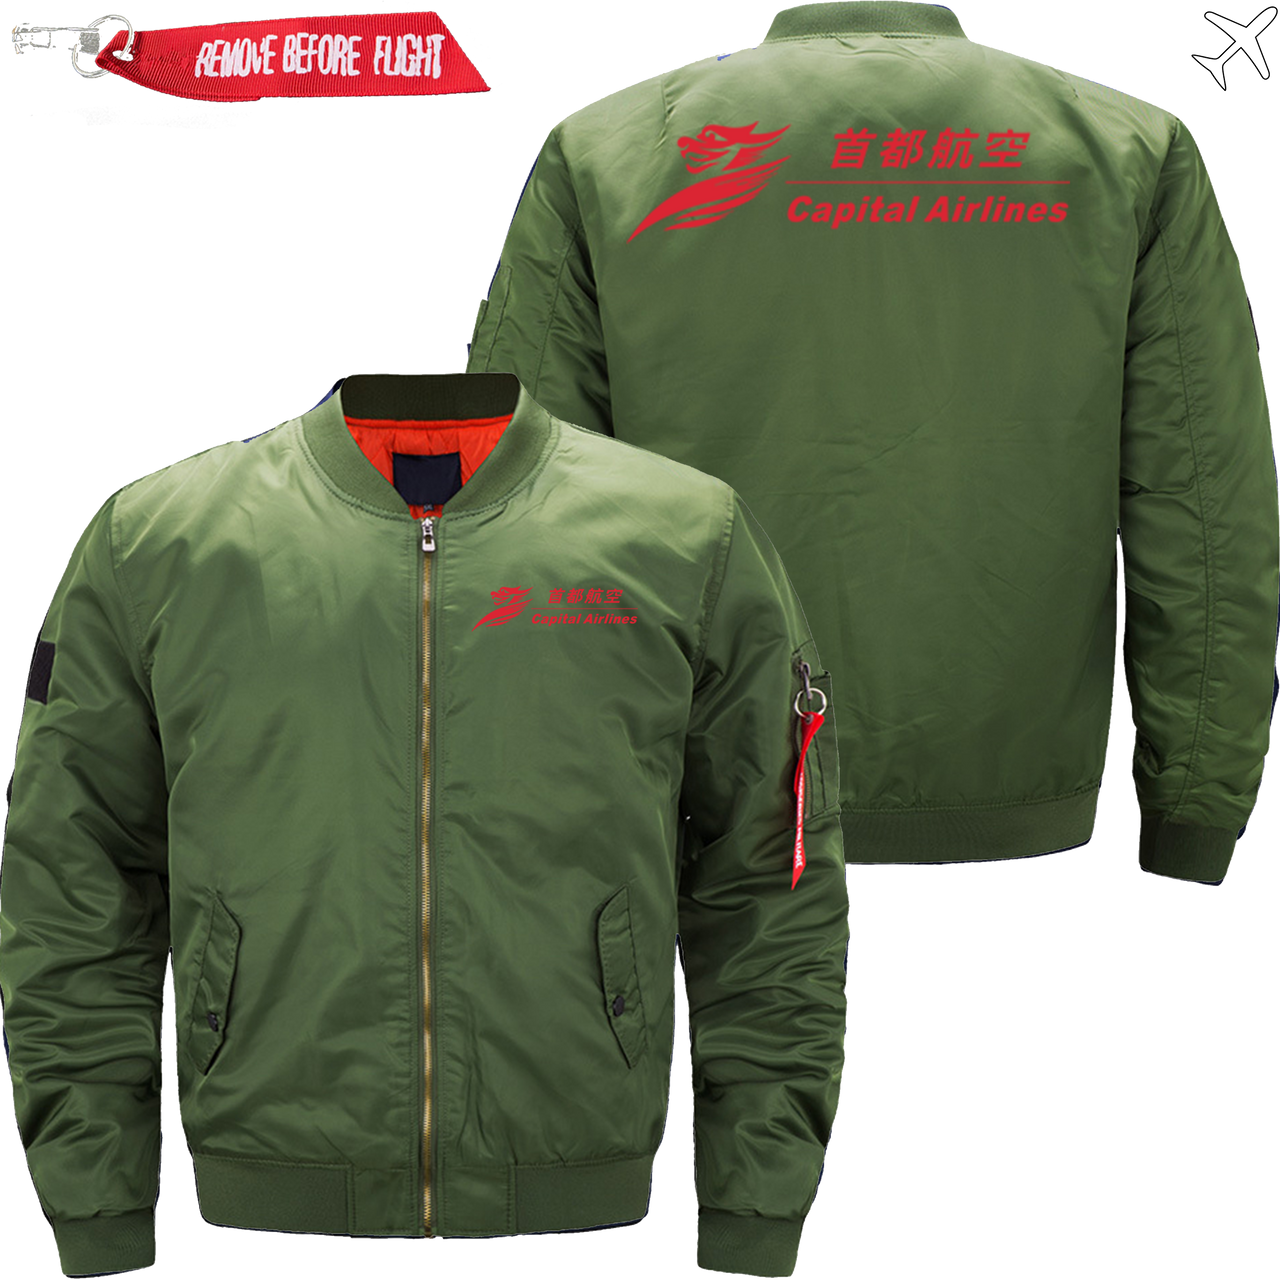 CAPITAL AIRLINE JACKET